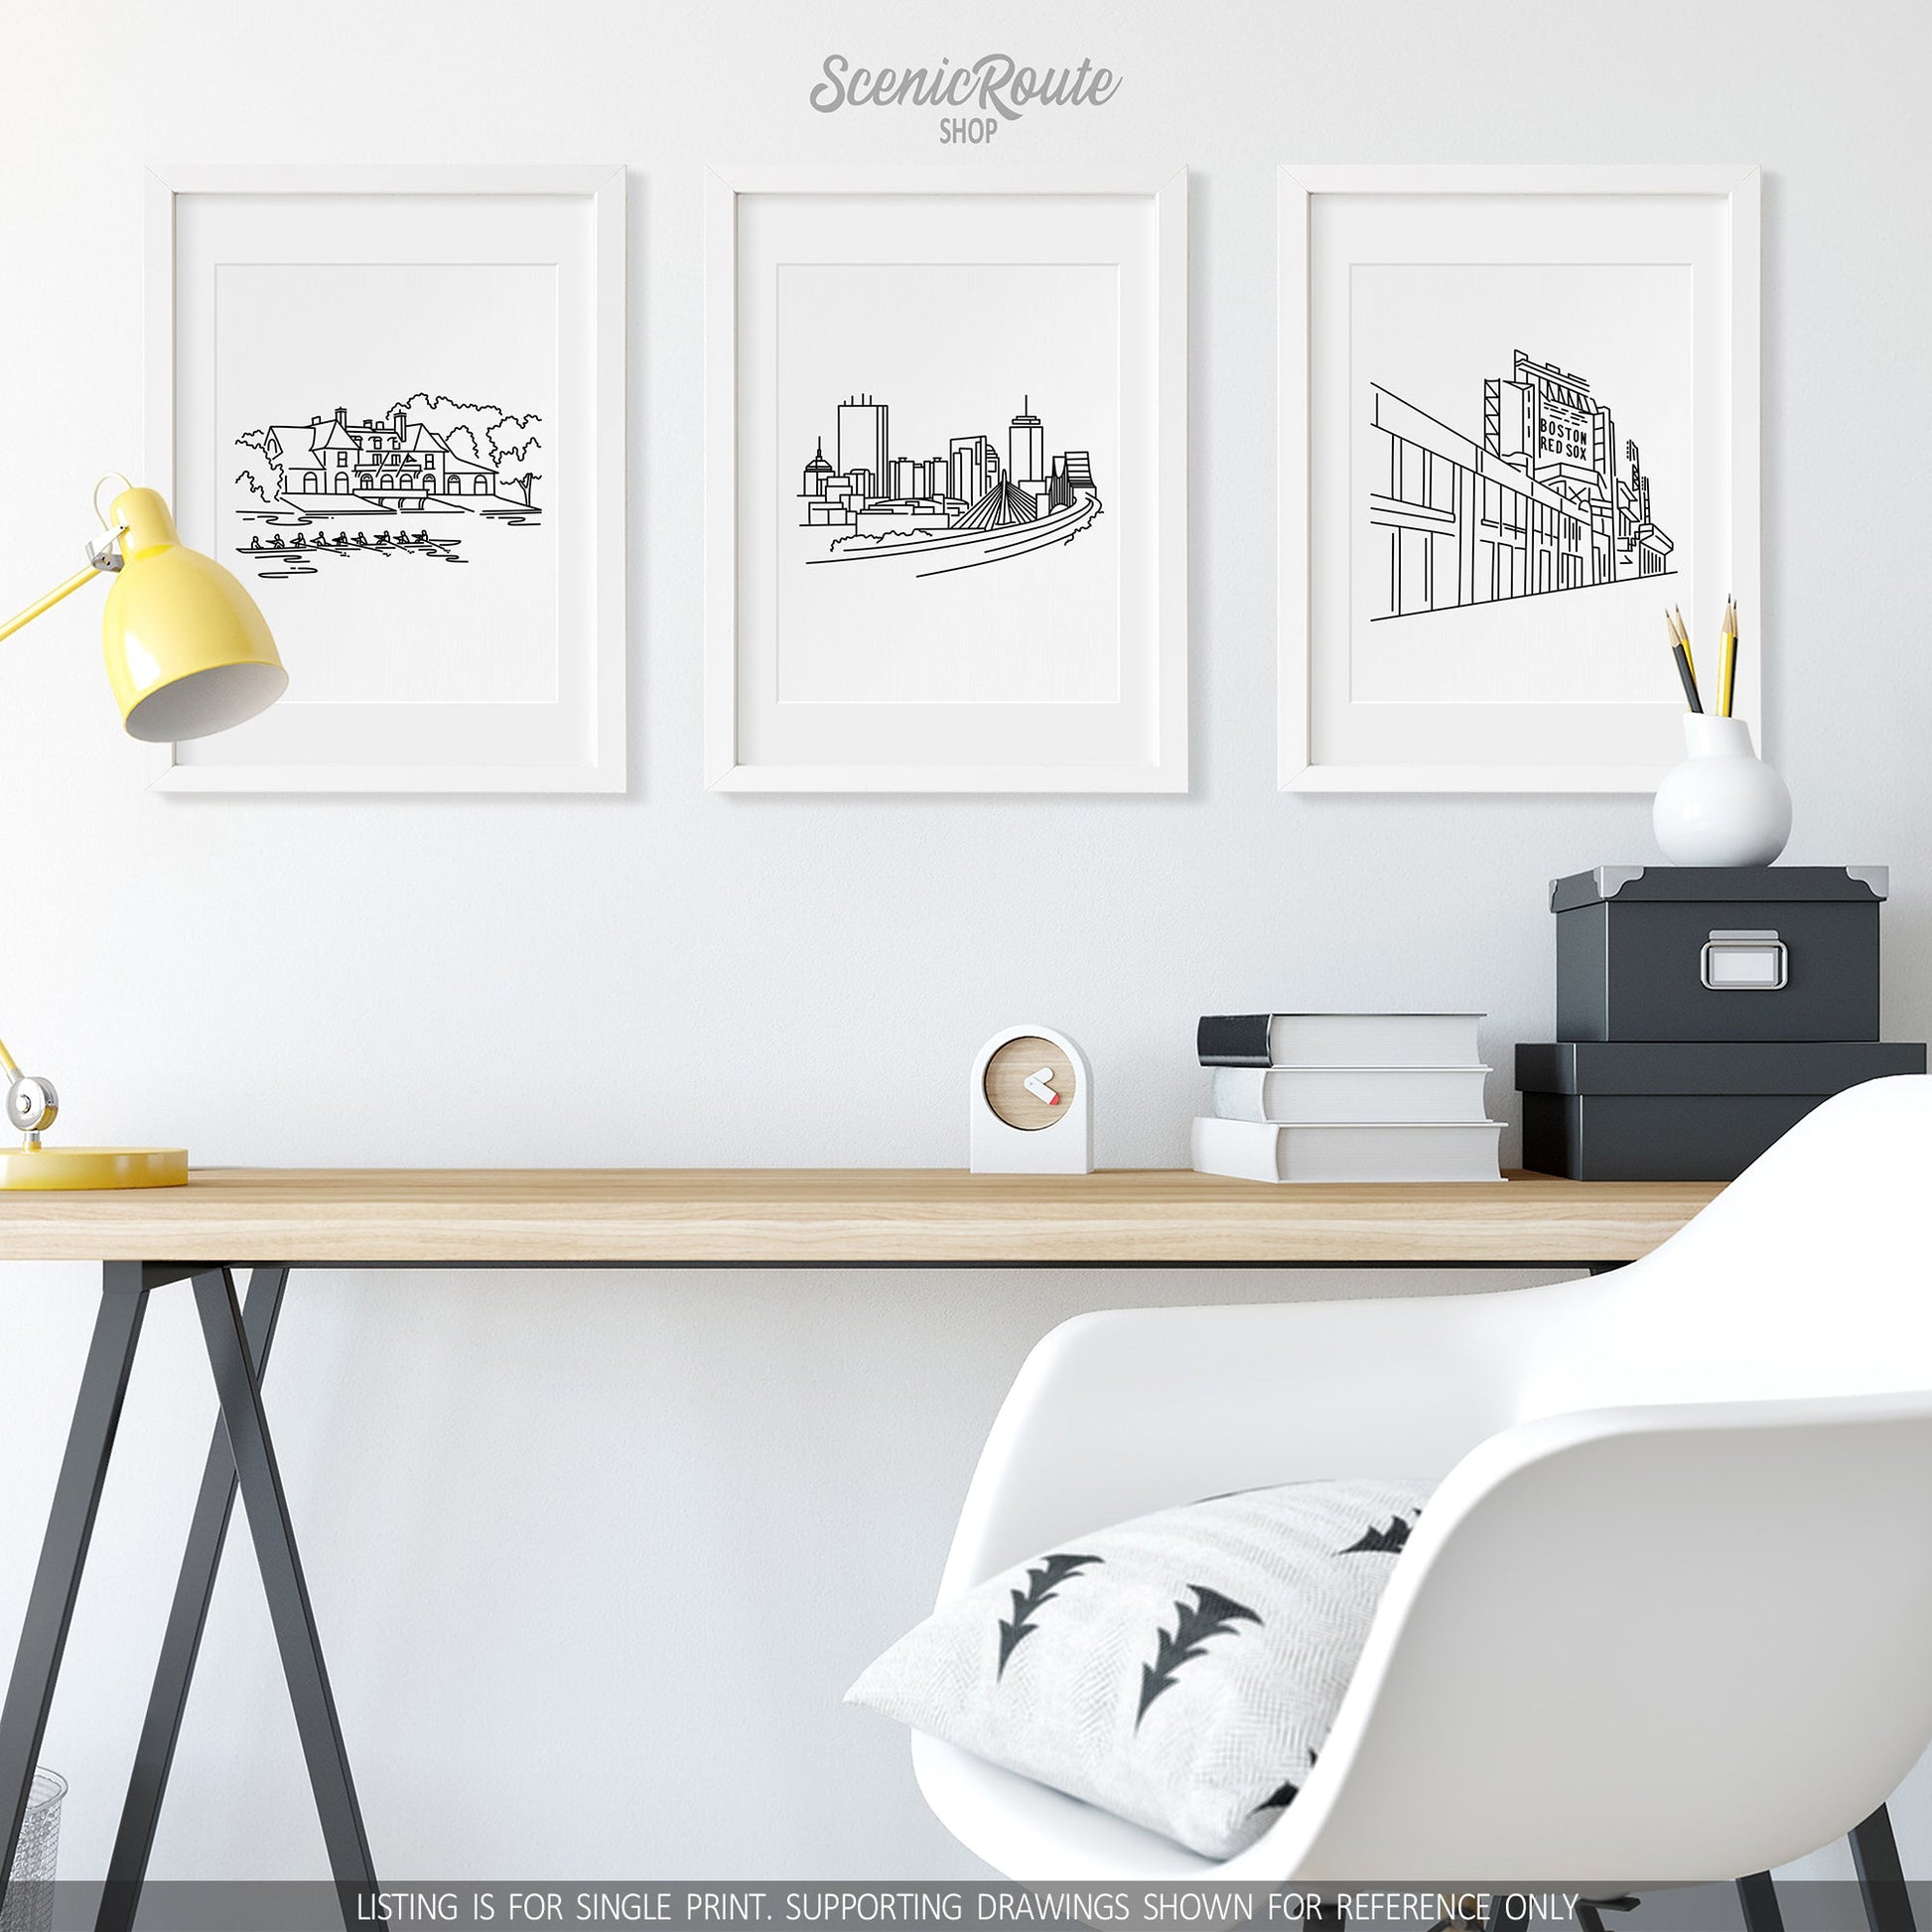 A group of three framed drawings on a wall above a desk. The line art drawings include the Harvard Boathouse, Boston Skyline, and Fenway Park